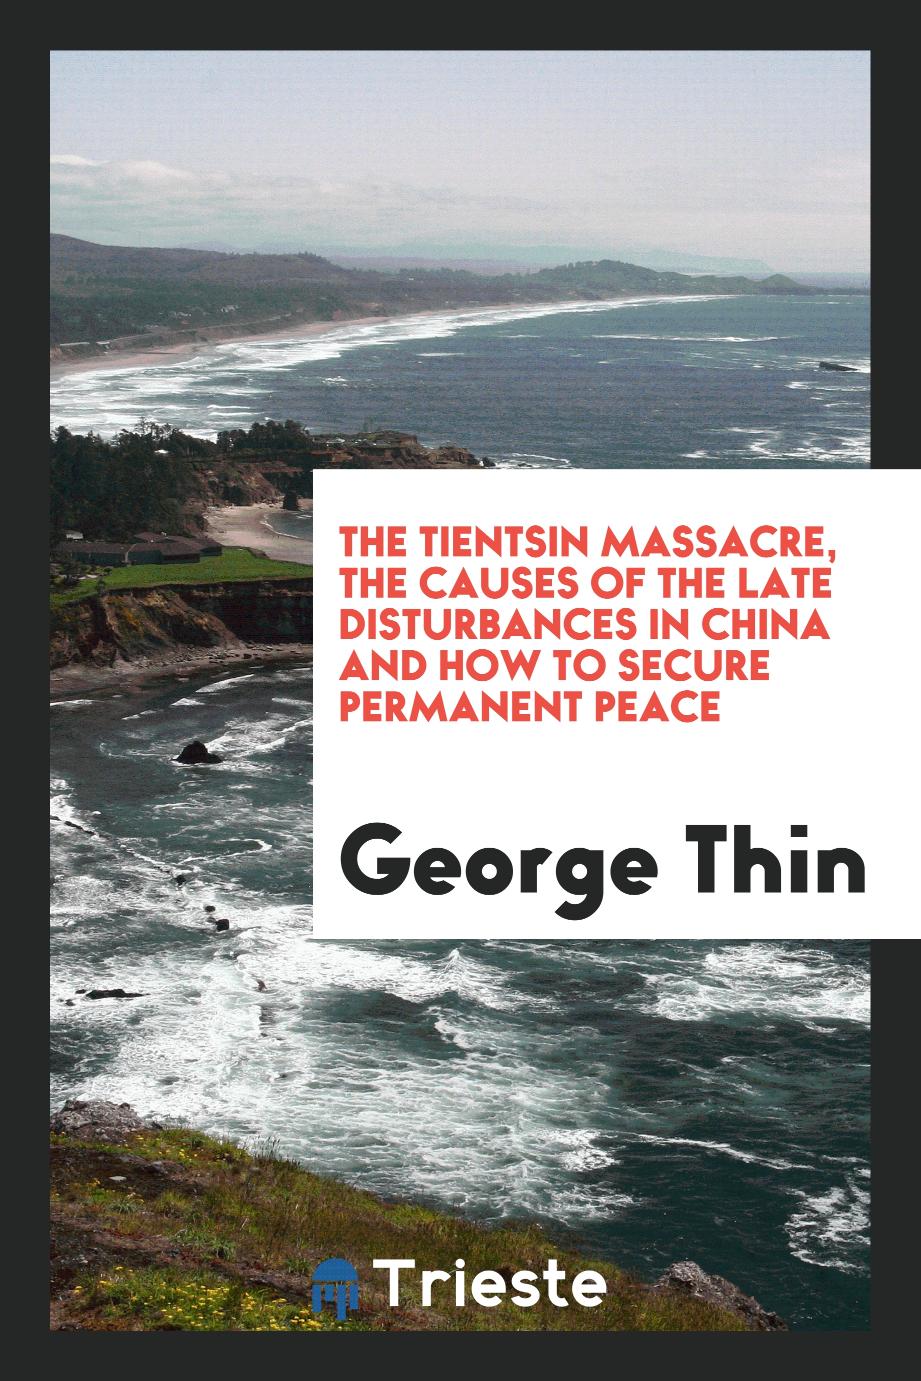 The Tientsin Massacre, the Causes of the Late Disturbances in China and How to Secure Permanent Peace